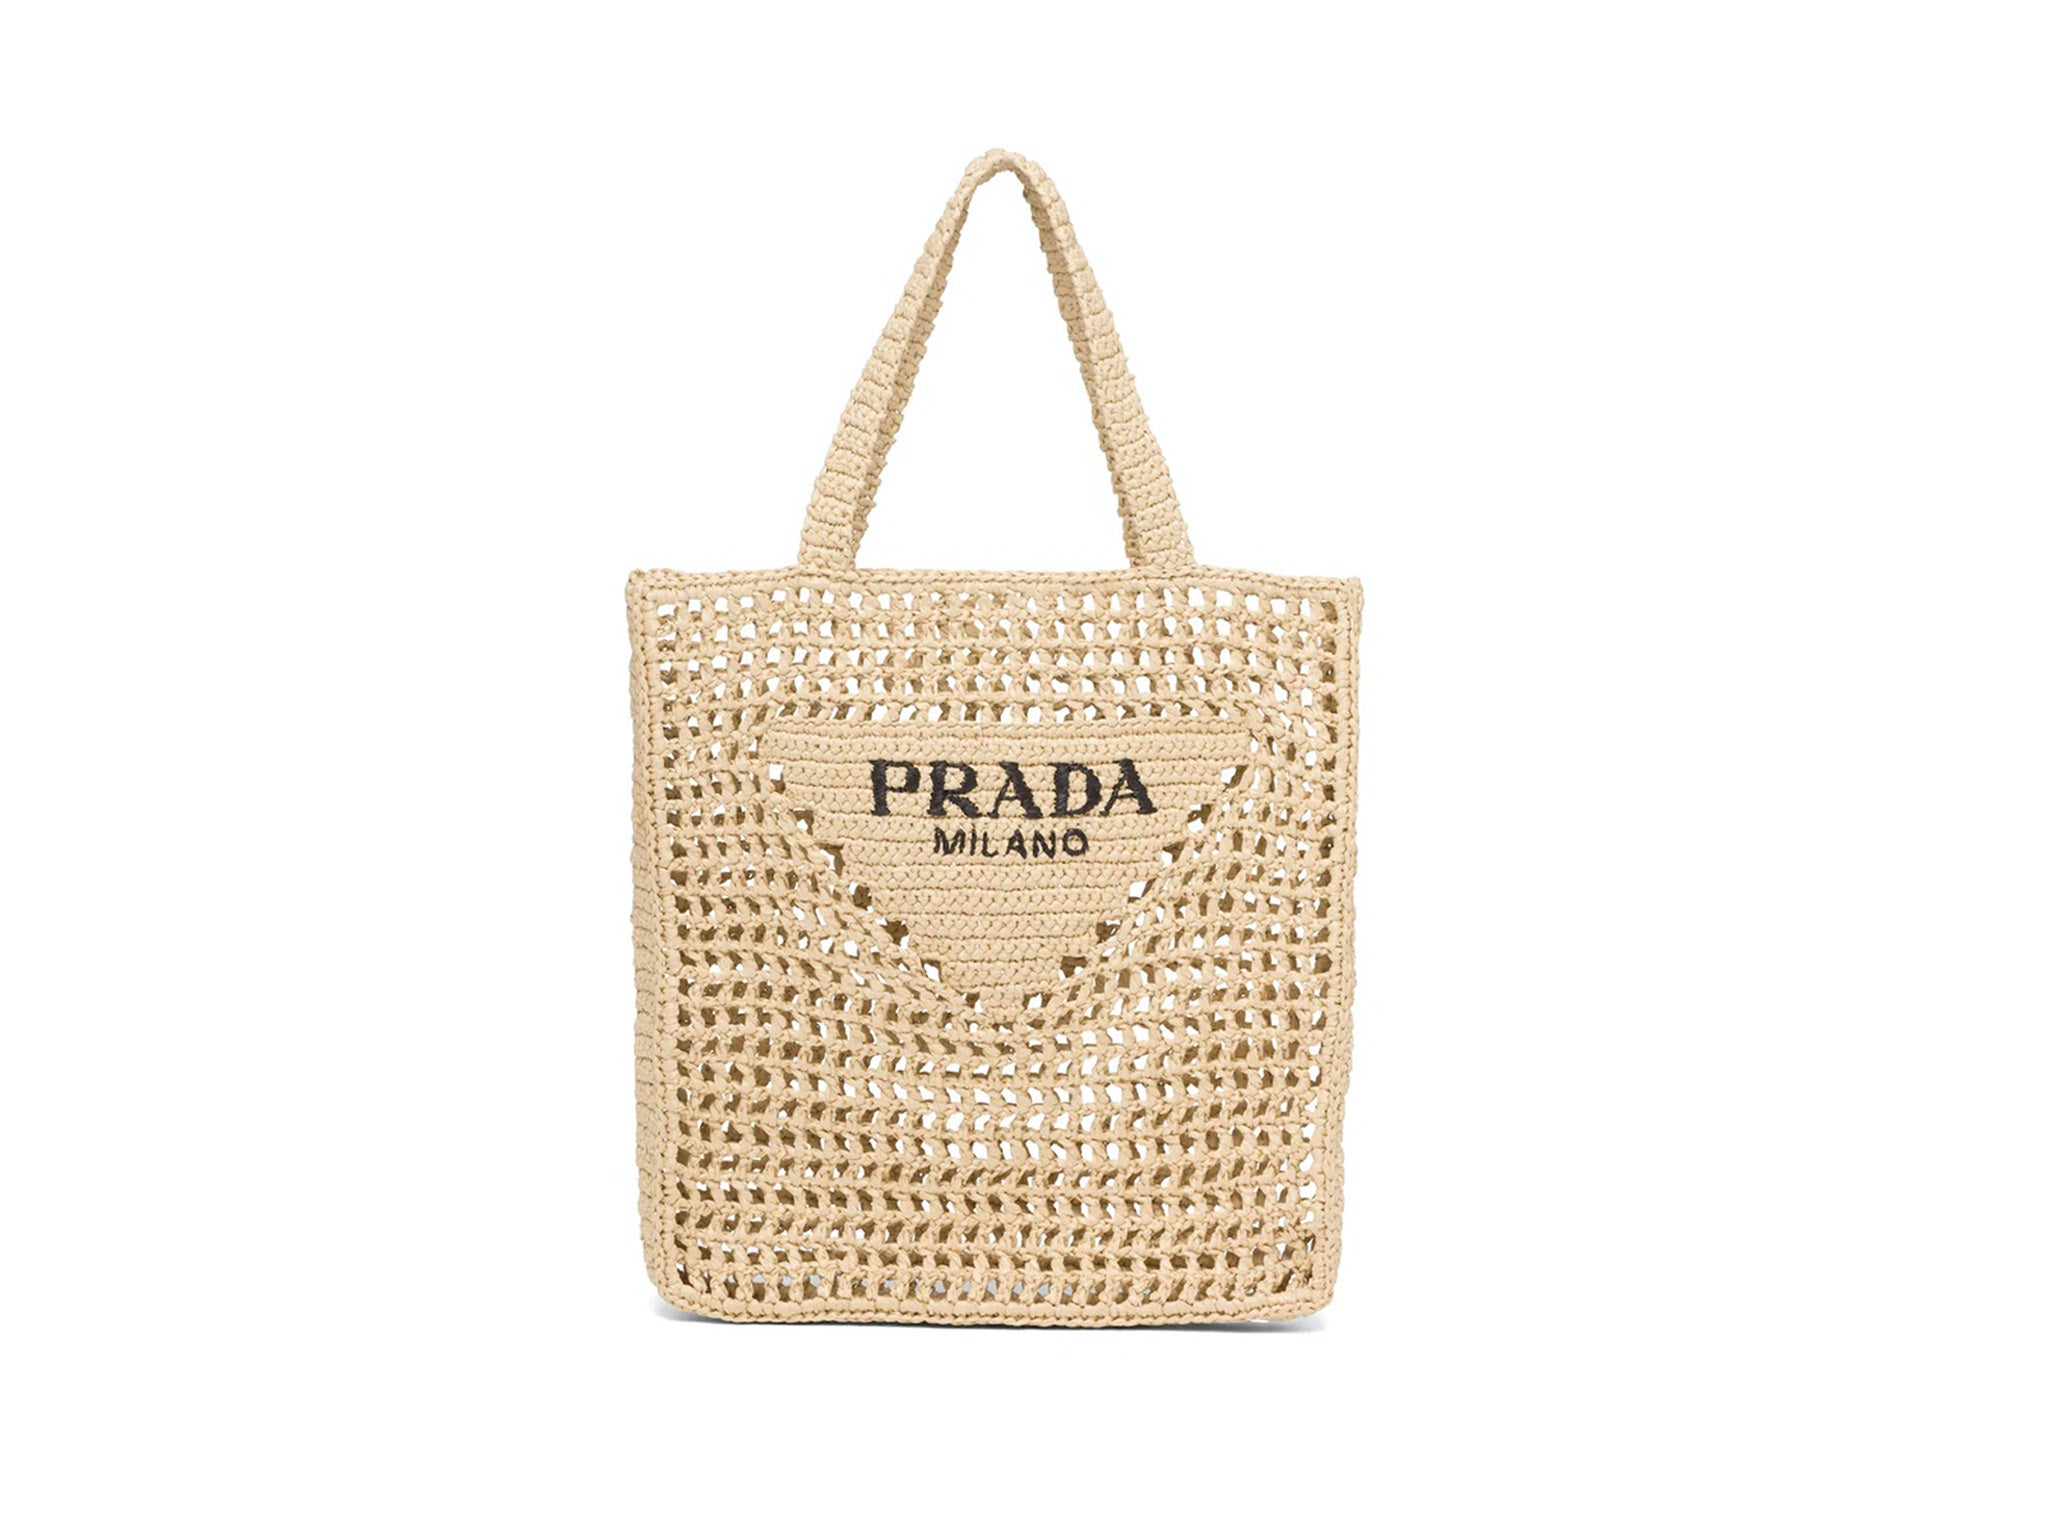 Zara just dropped an alternative to Prada's raffia tote – and it costs  £1,300 less | The Independent